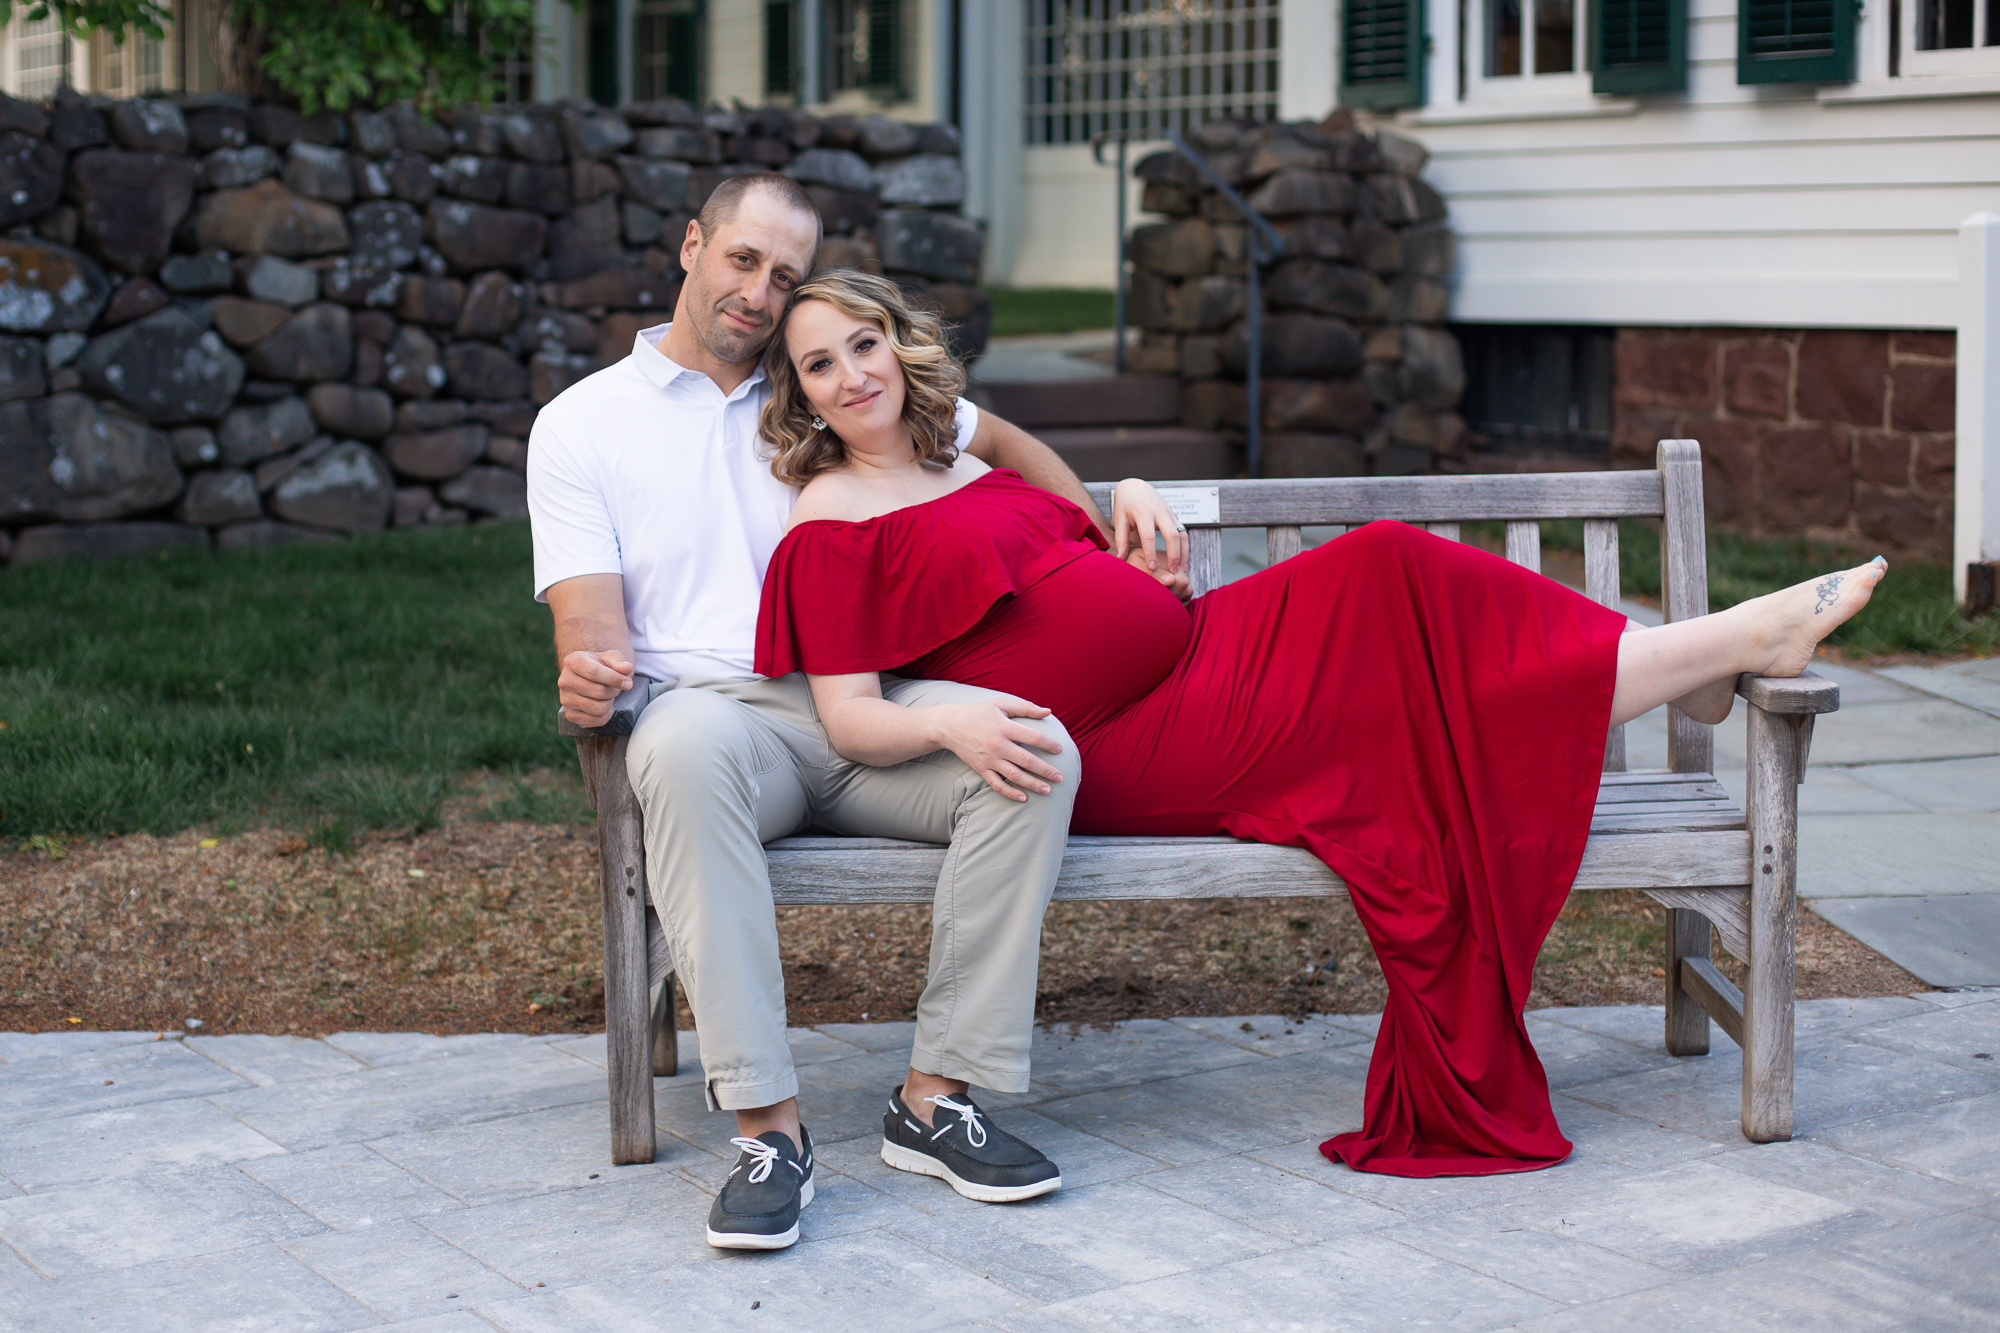 Outdoor Maternity Session in Connecticut - CT Pregnancy Photographer